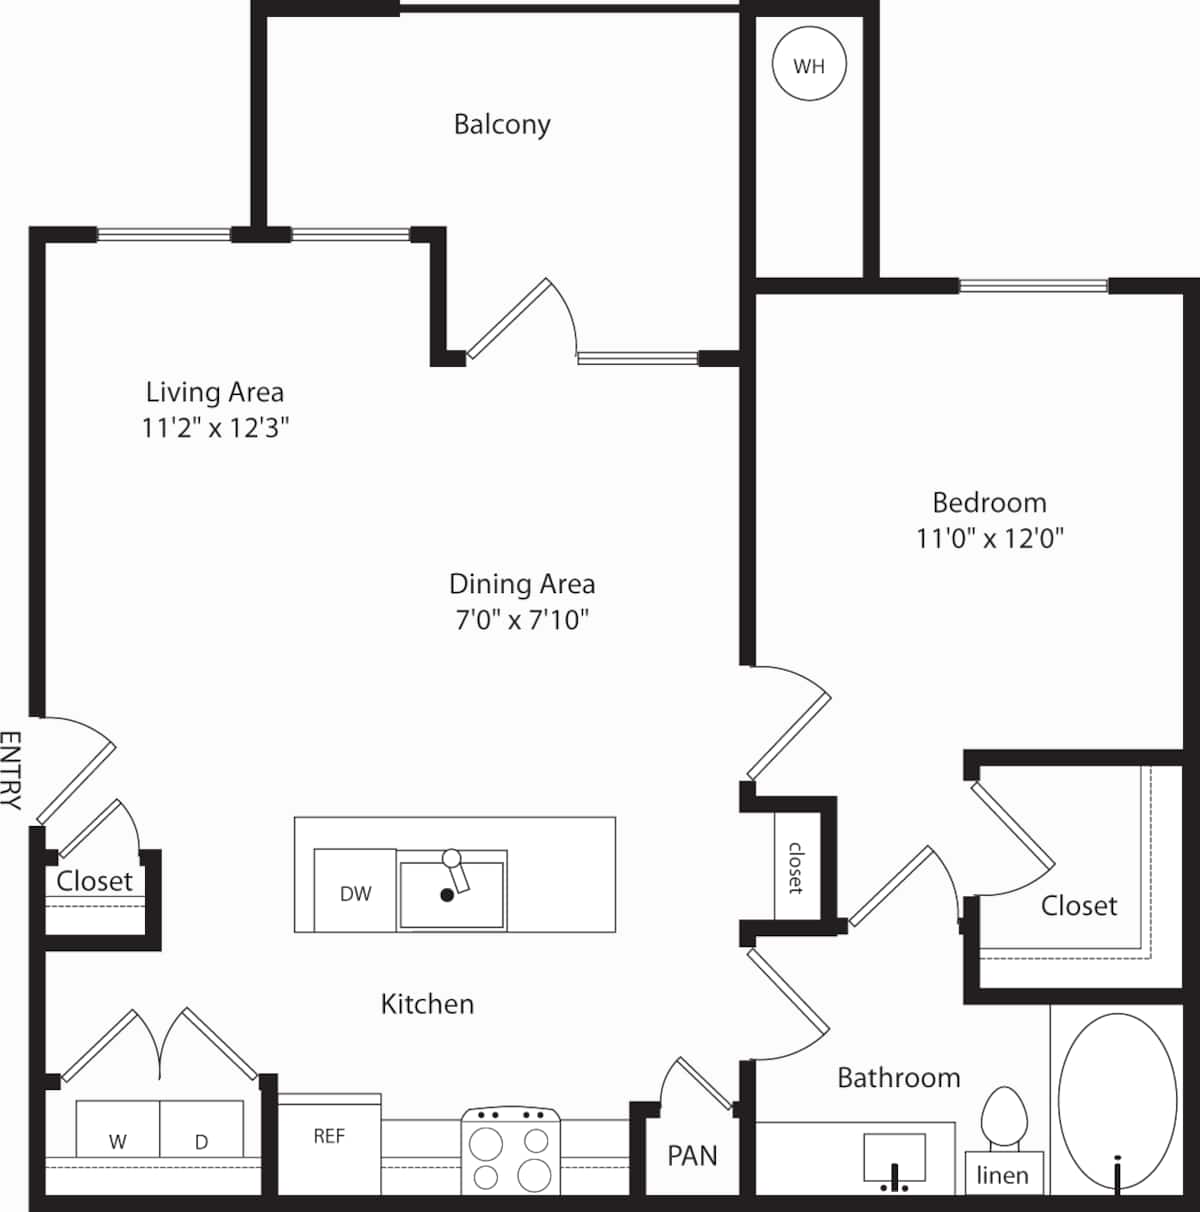 Floorplan diagram for A1a, showing 1 bedroom